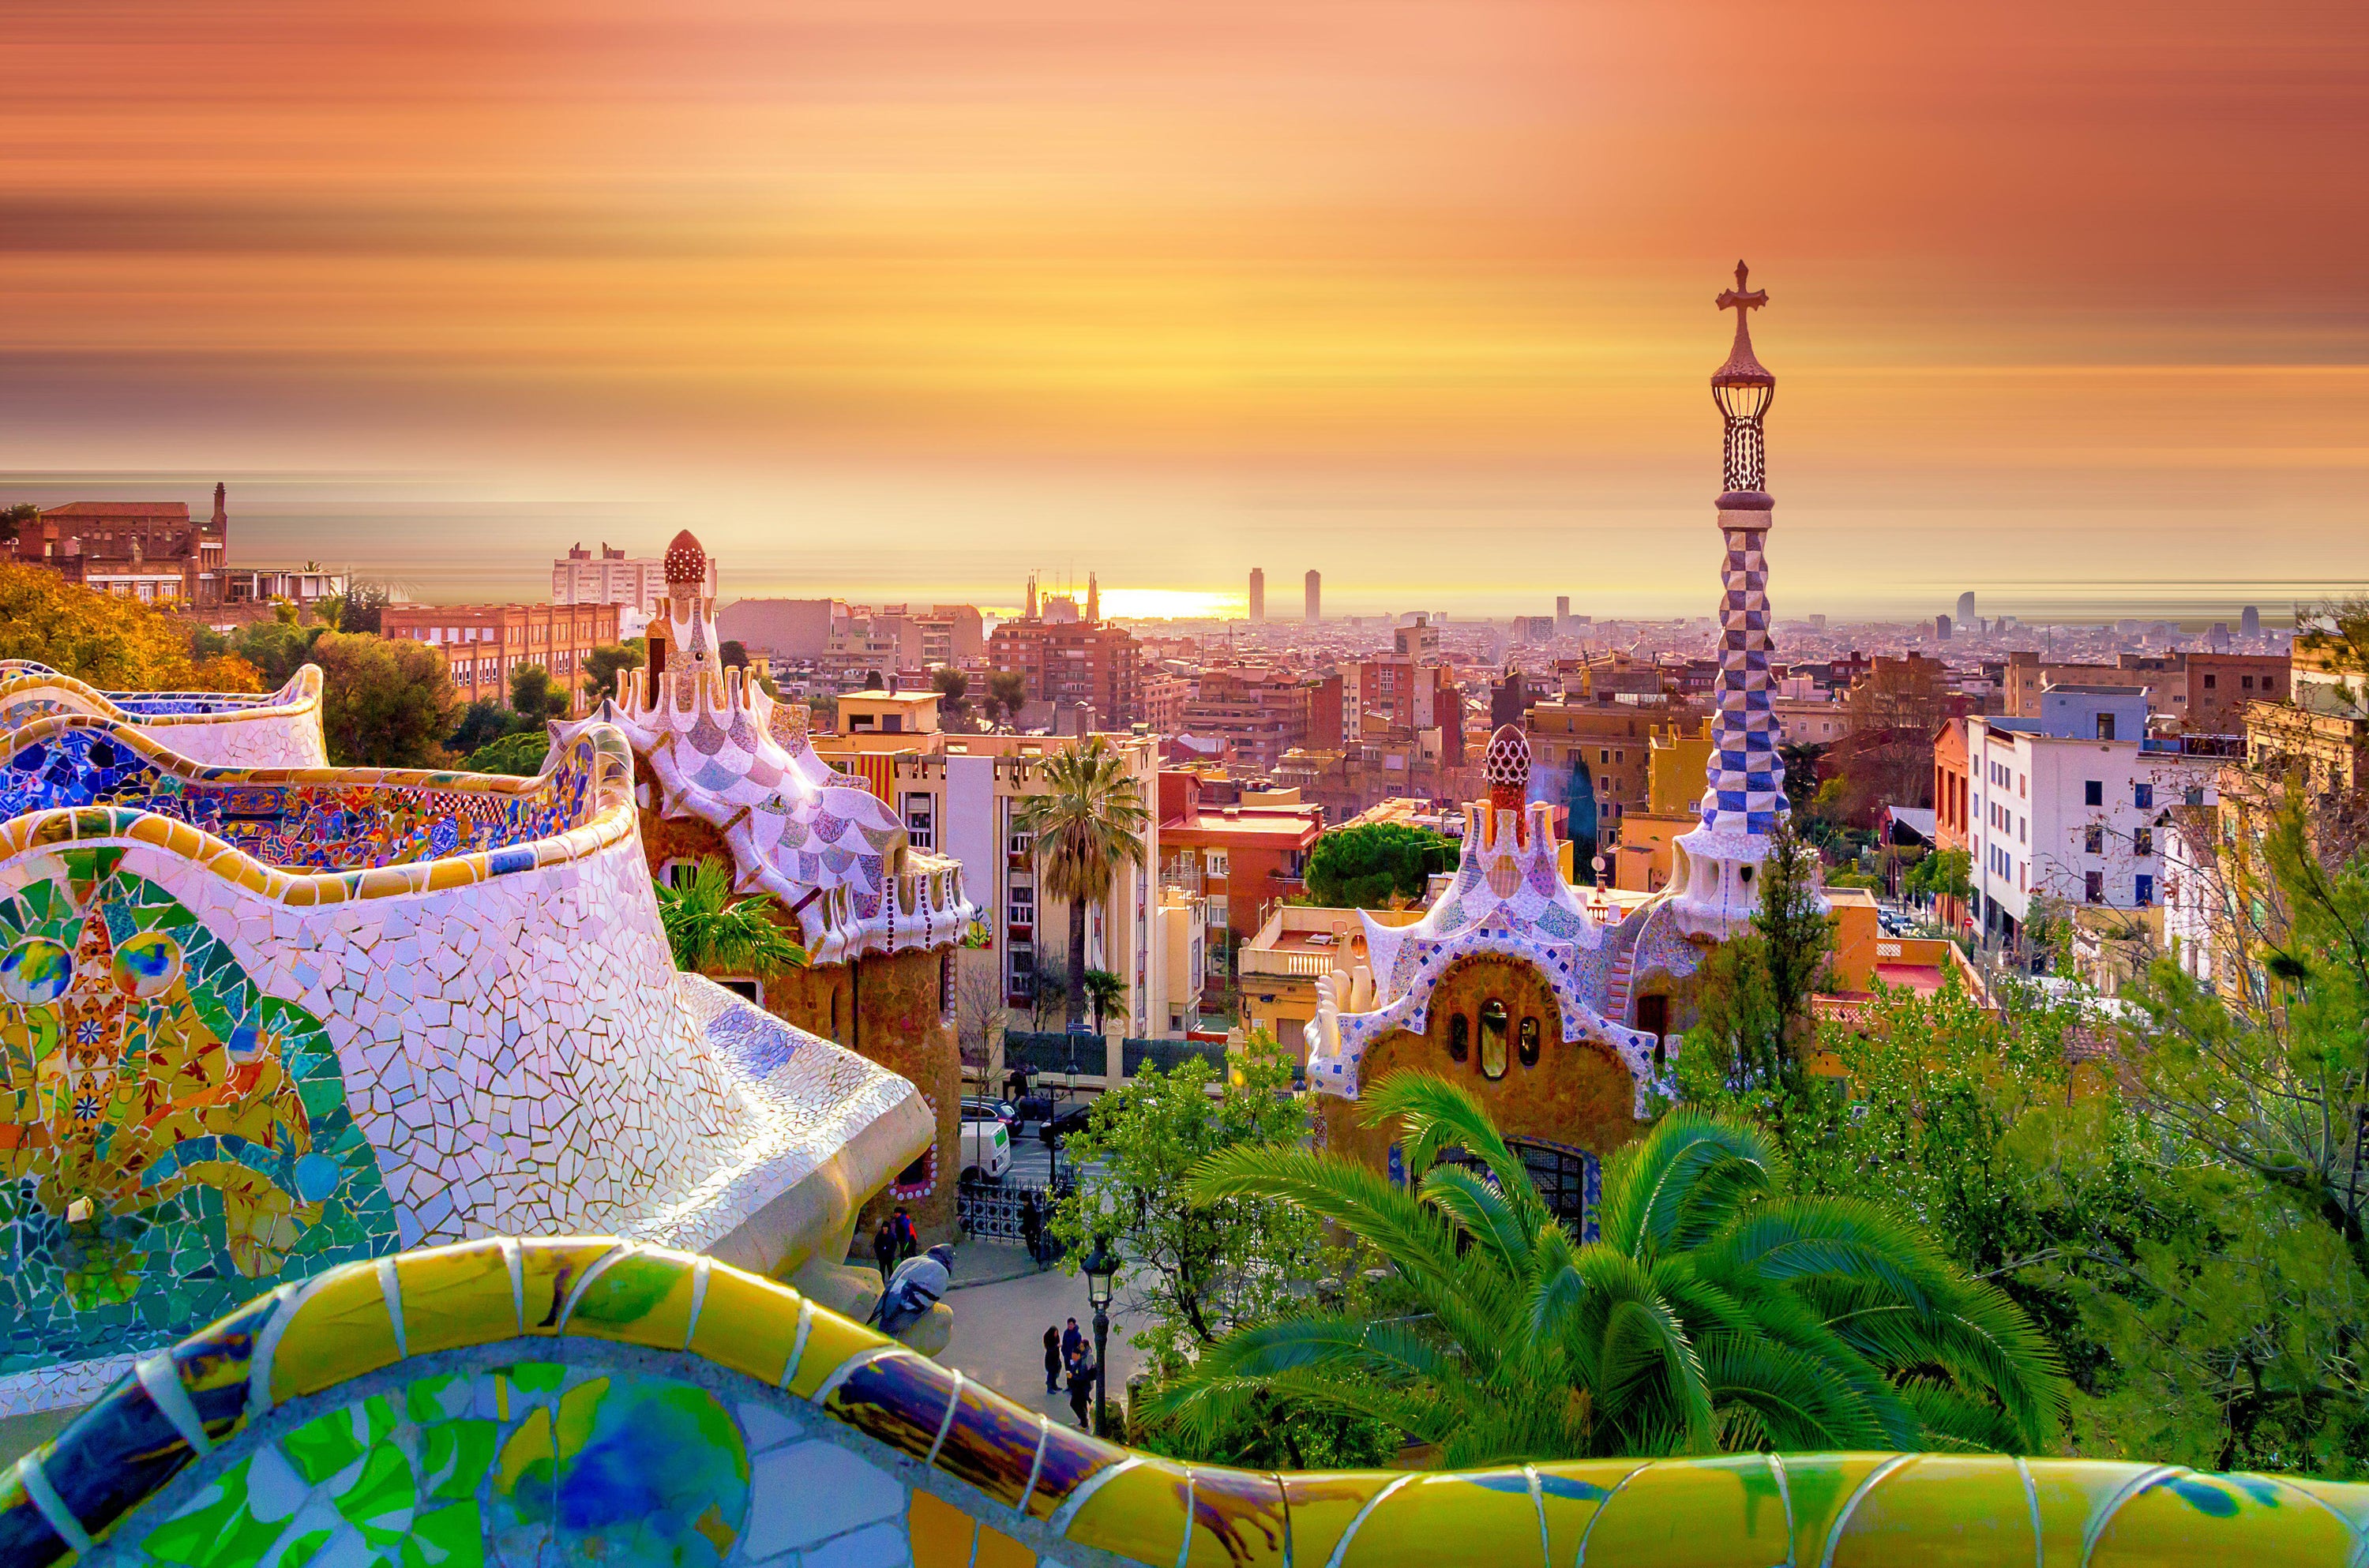 The view from Guell Park, designed by Gaudi